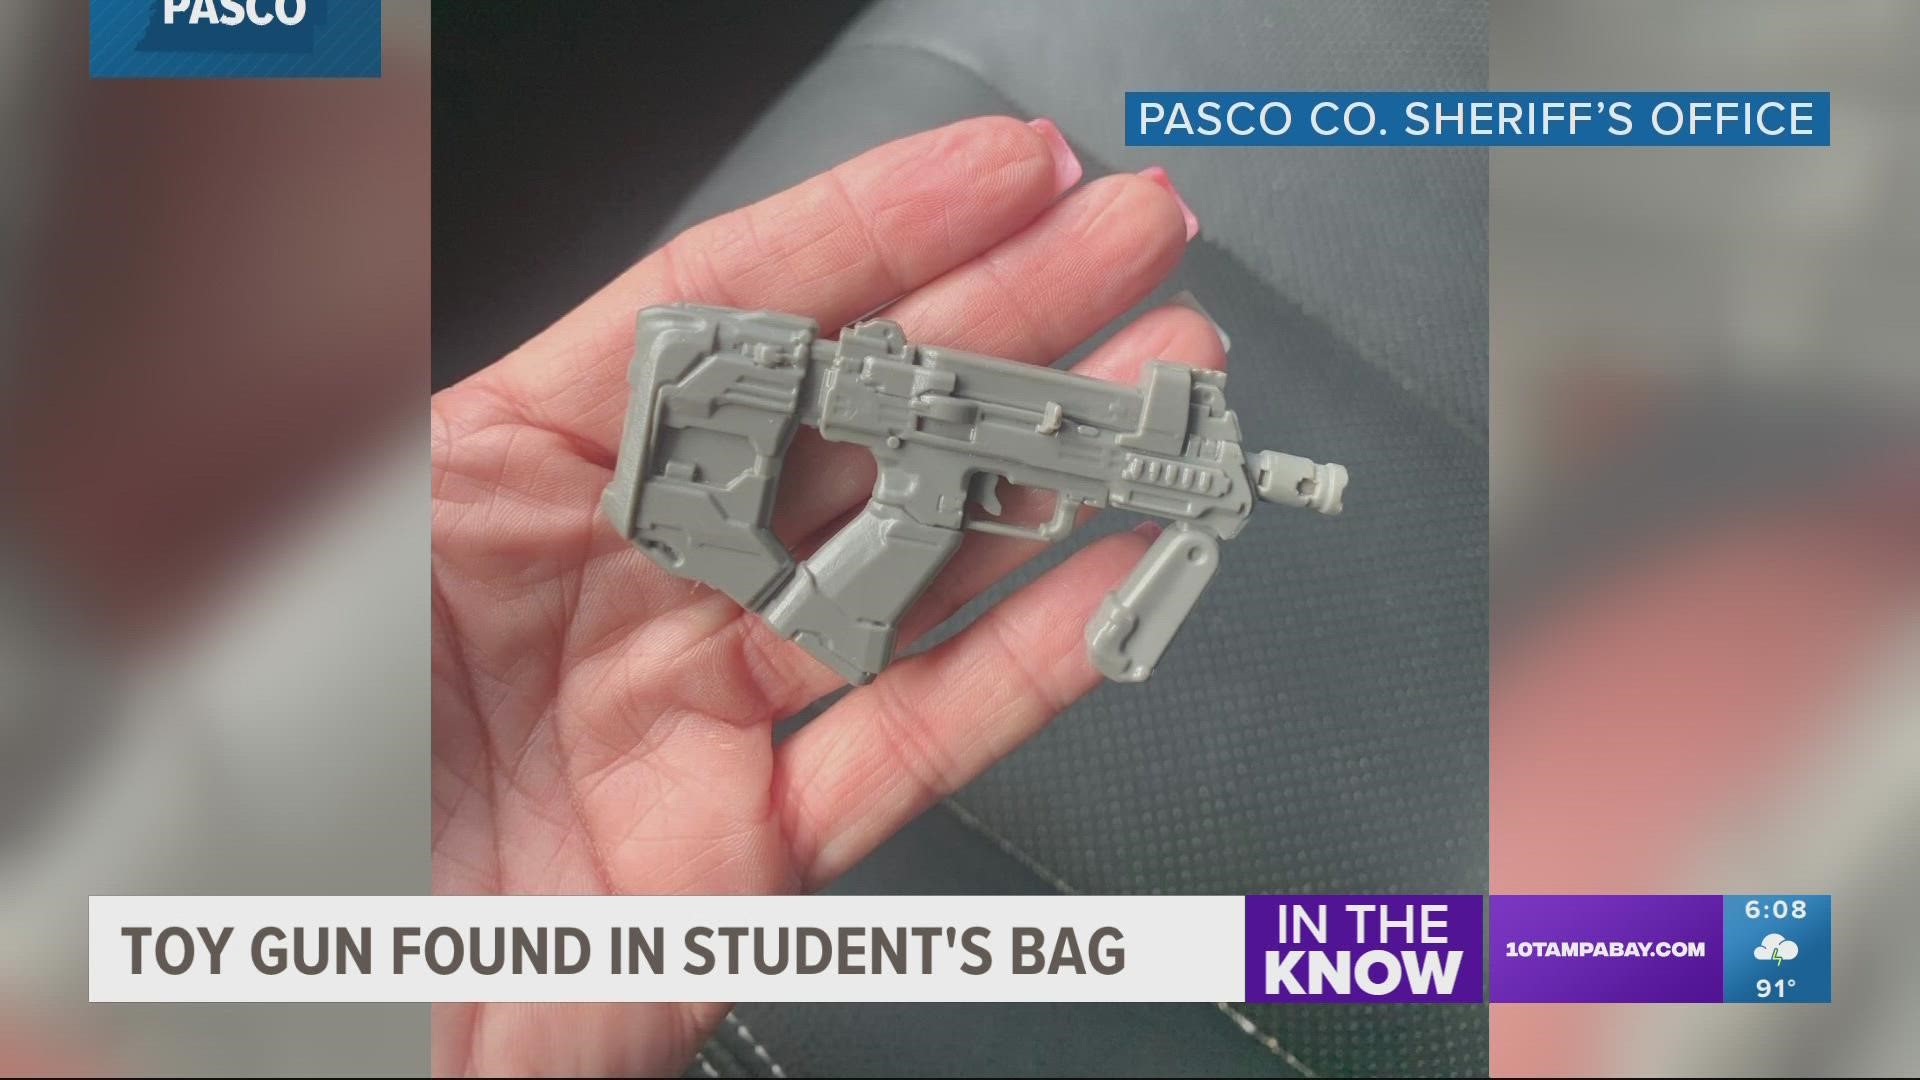 Leaders said a student told the bus driver that another child had a gun in their backpack.